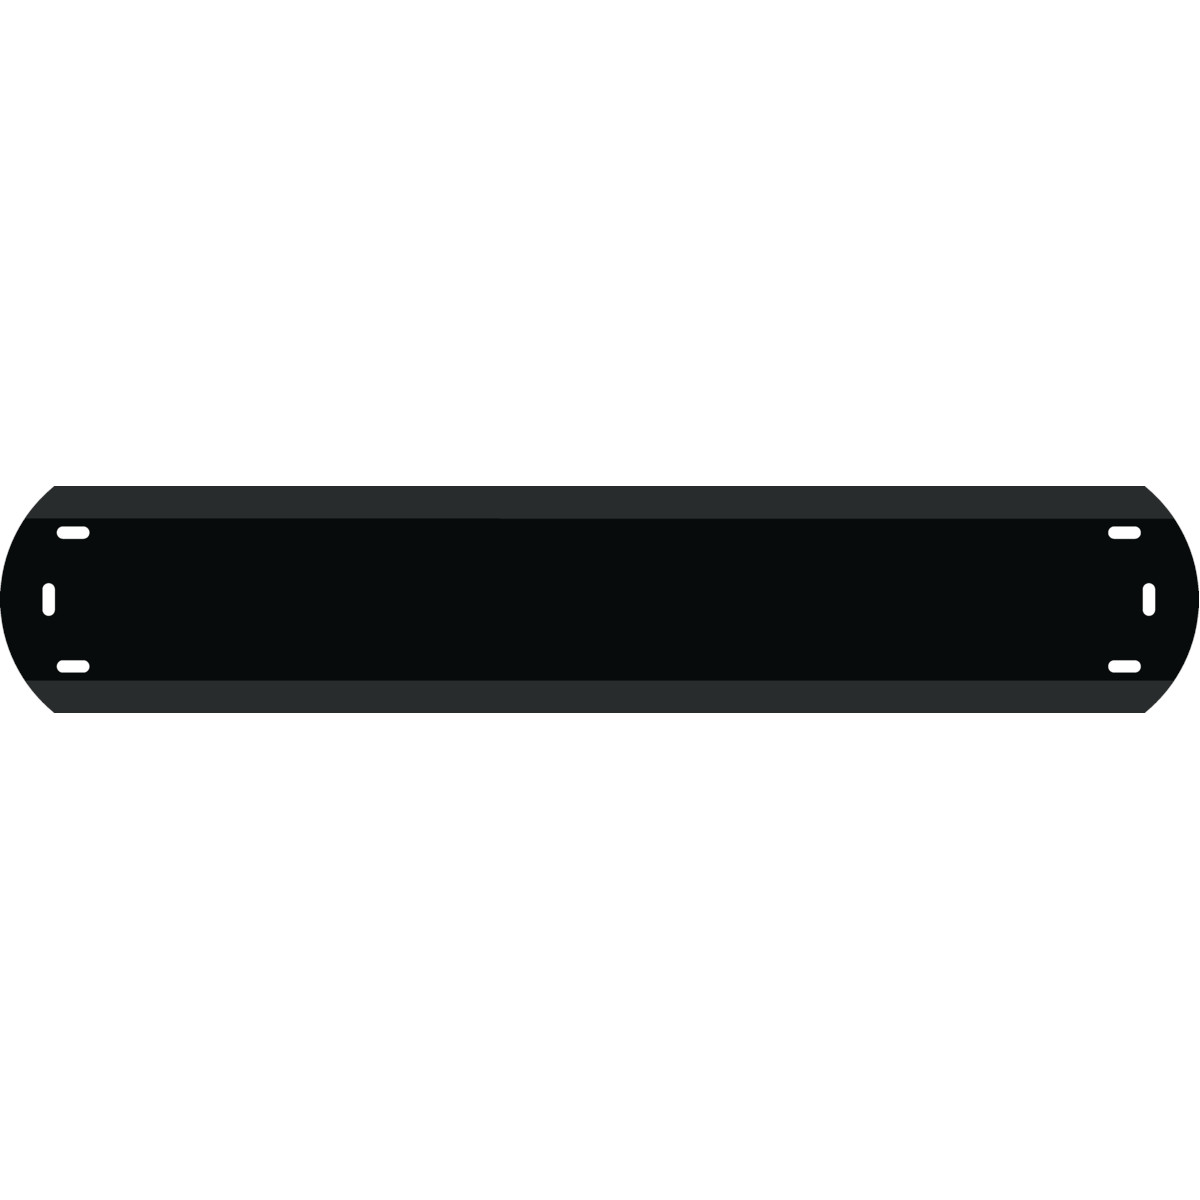 1" Character Polyethylene Holder - Fits 8 Characters